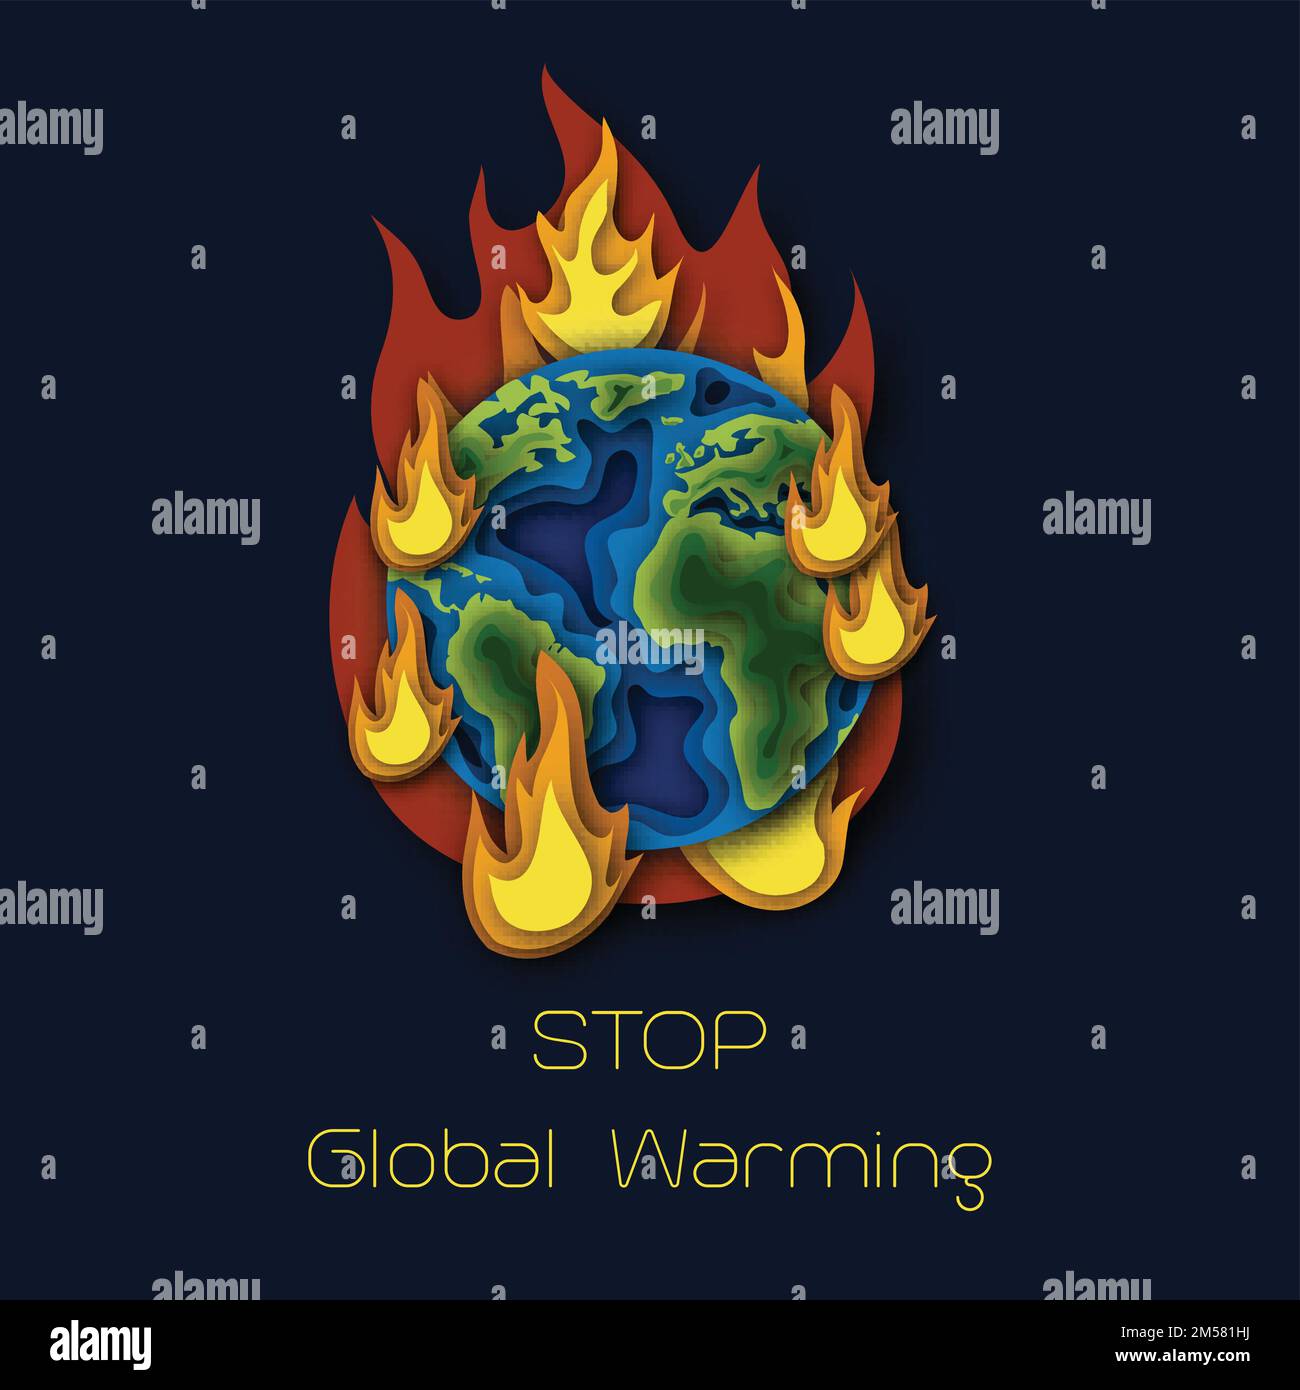 Stop global warming poster template with planet Earth globe burning in fire flame and text. Ecology concept. Paper cut out style vector illustration. Stock Vector